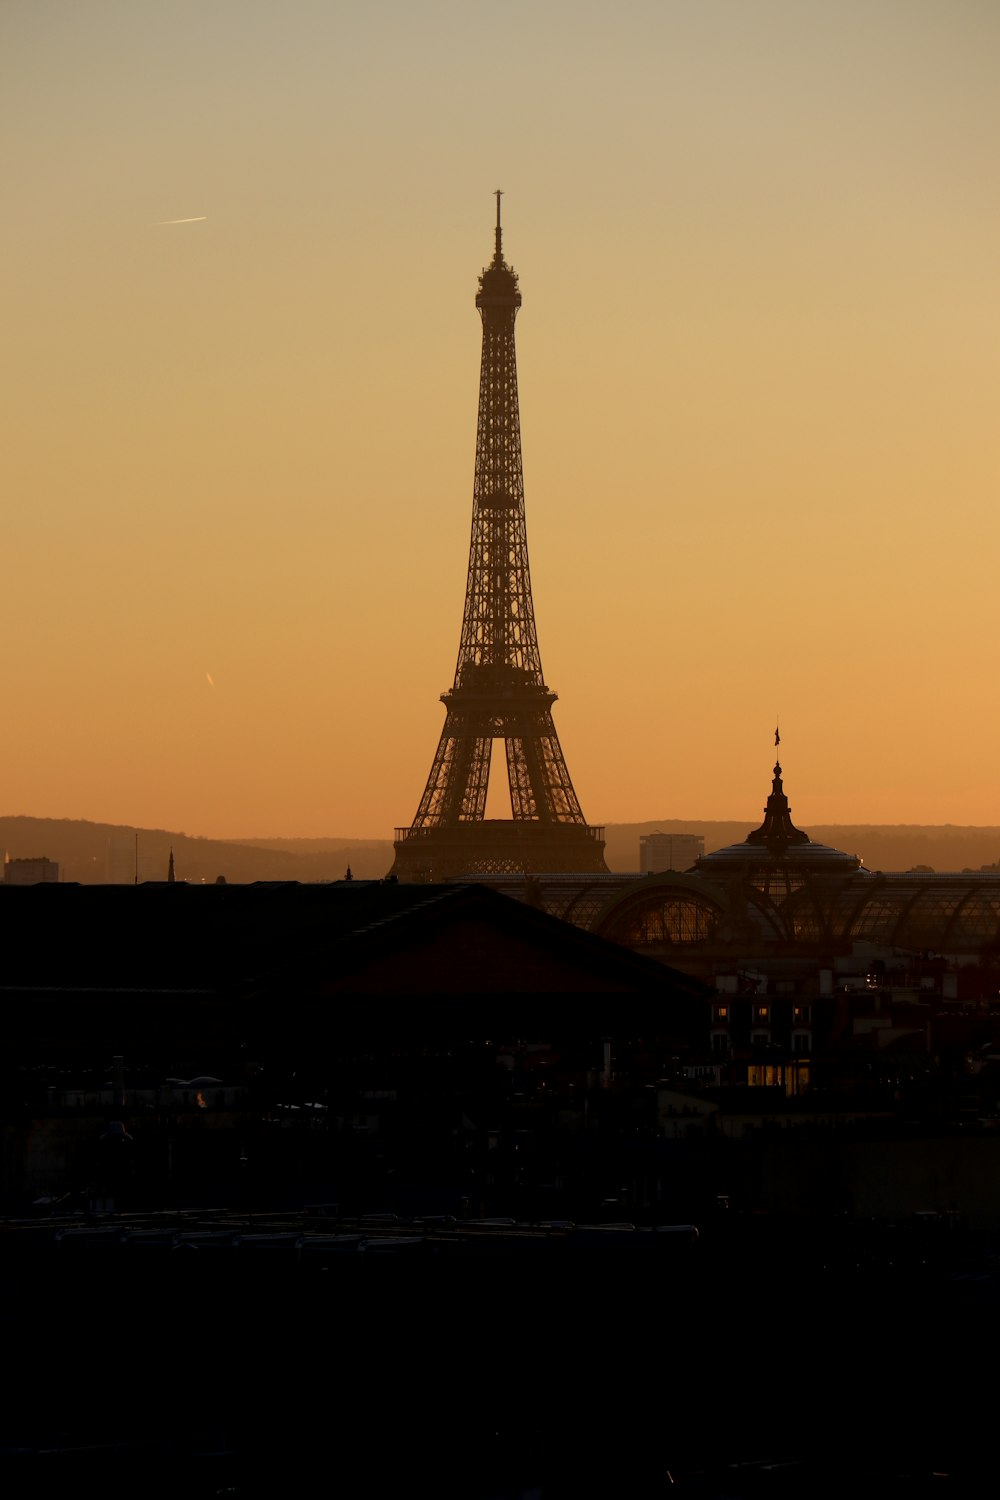 the eiffel tower is silhouetted against the sunset